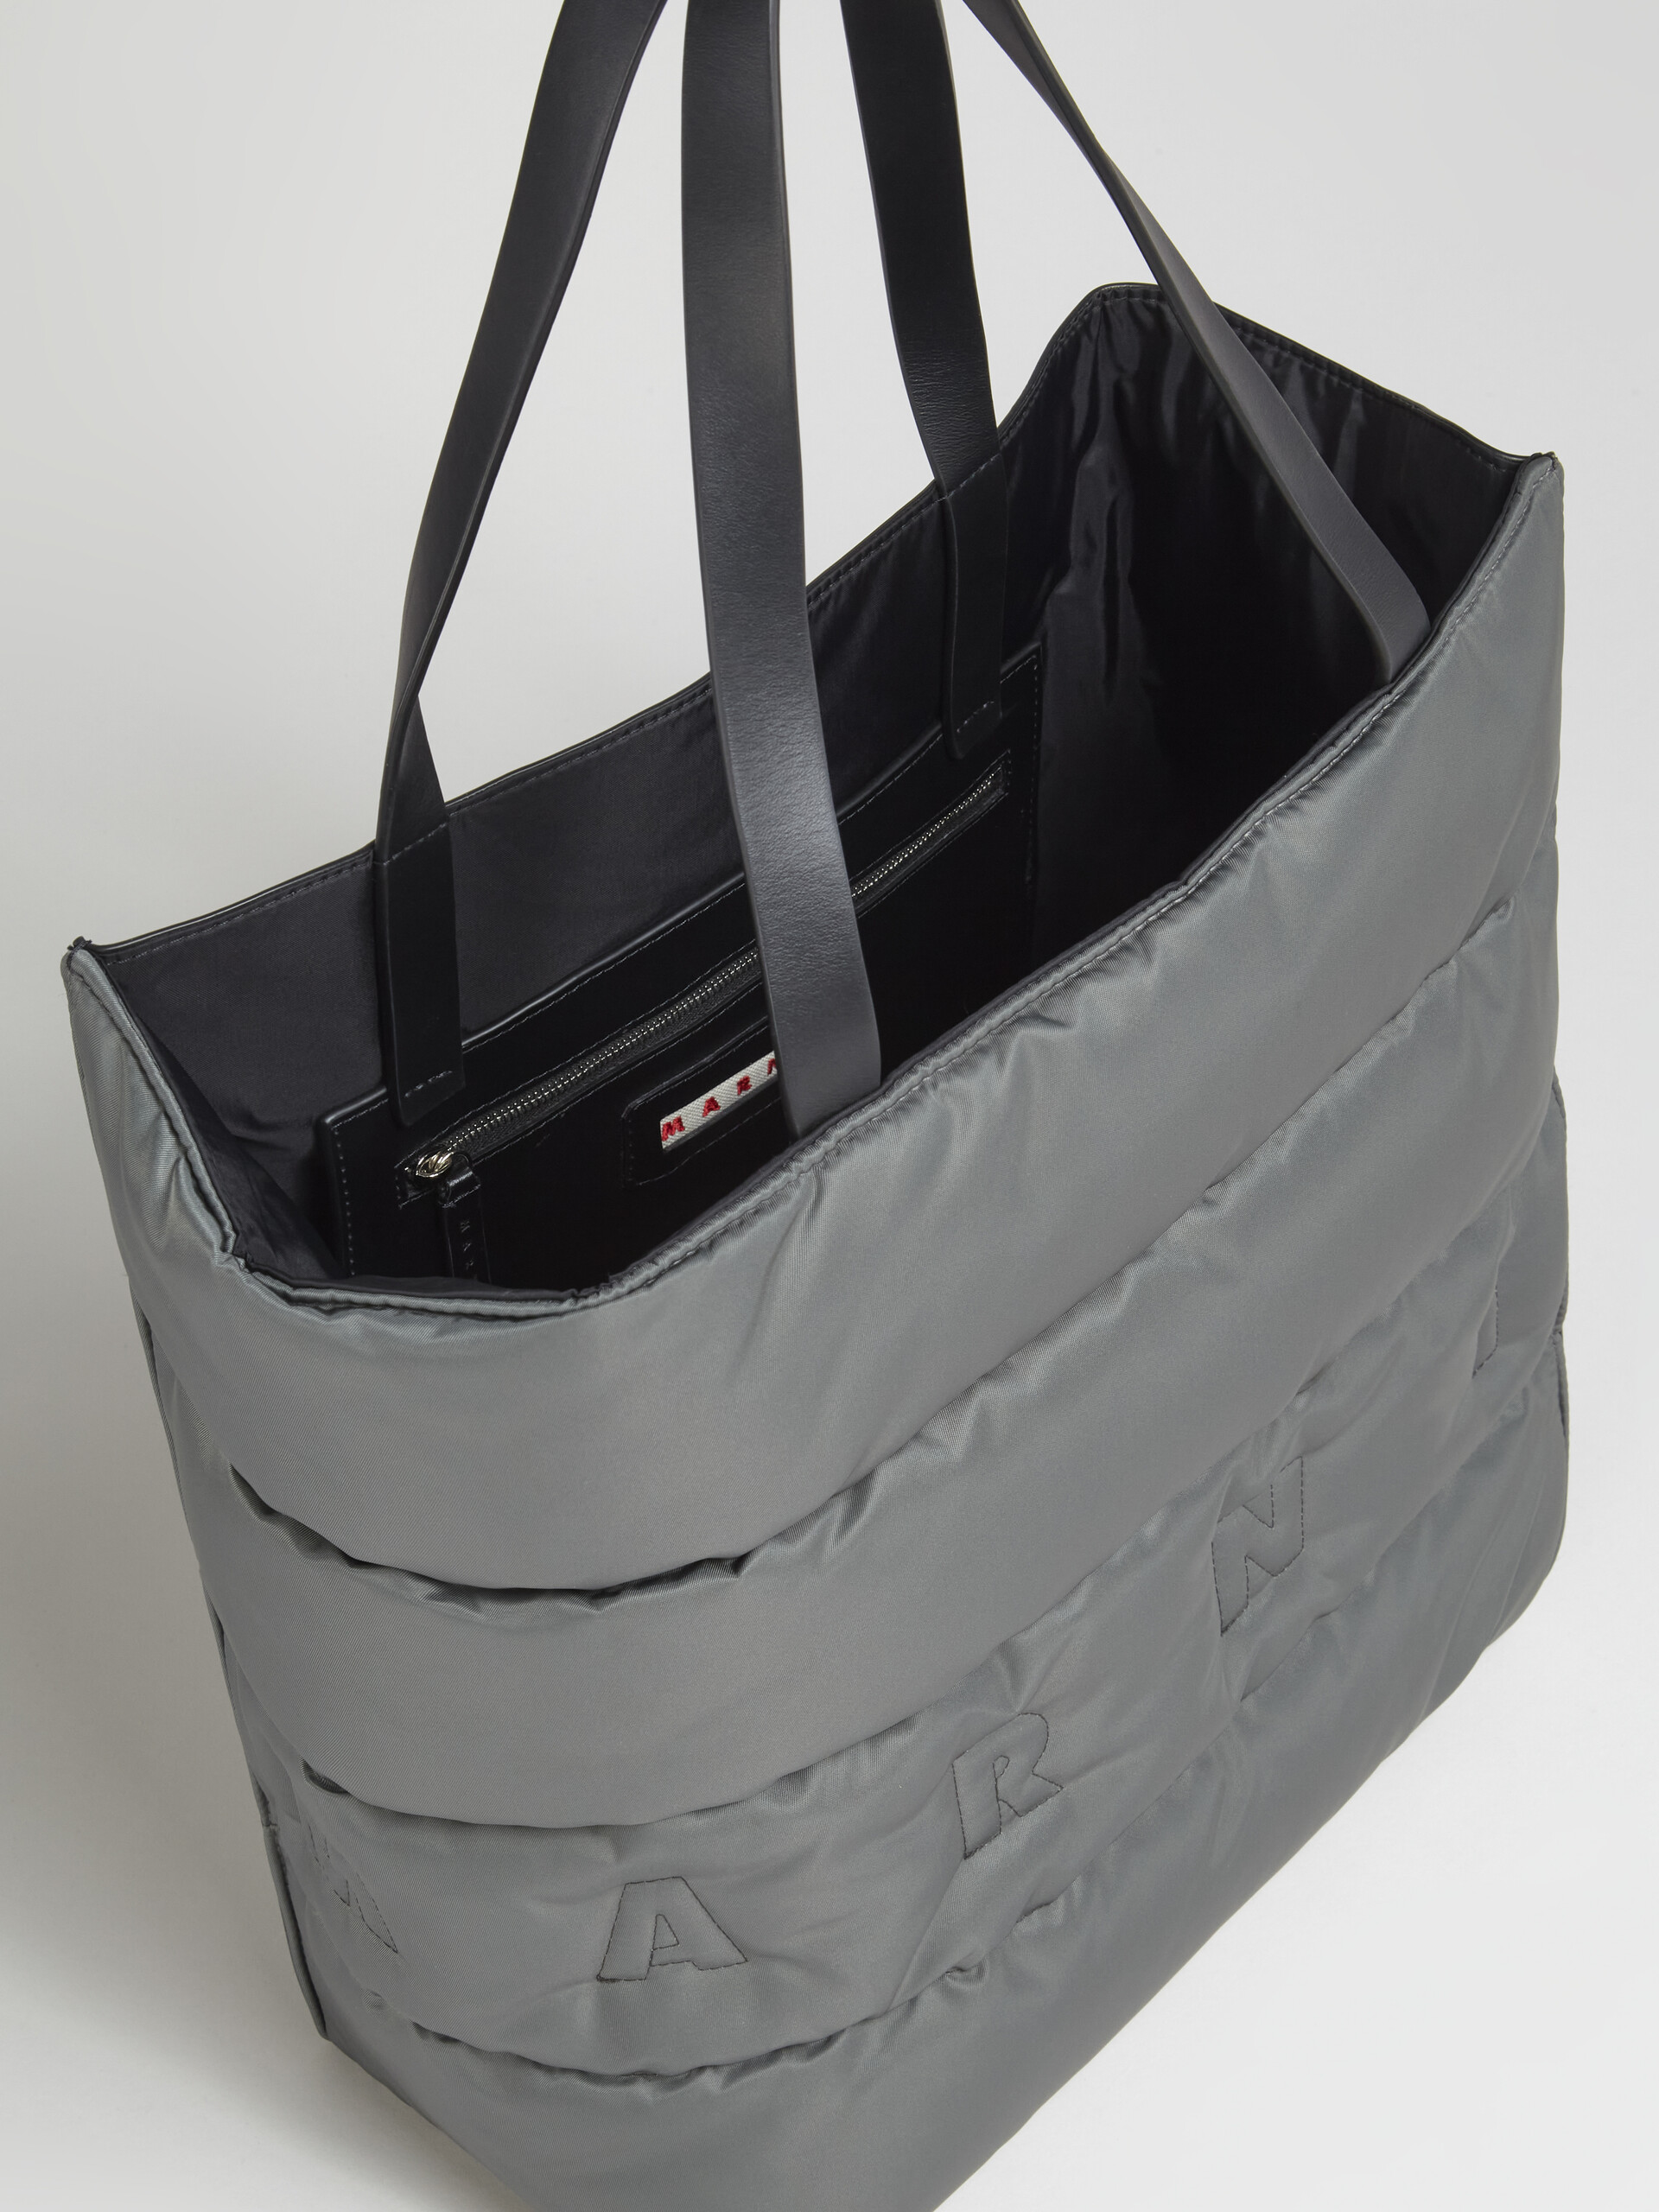 MUSEO large bag in grey nylon - Shopping Bags - Image 5